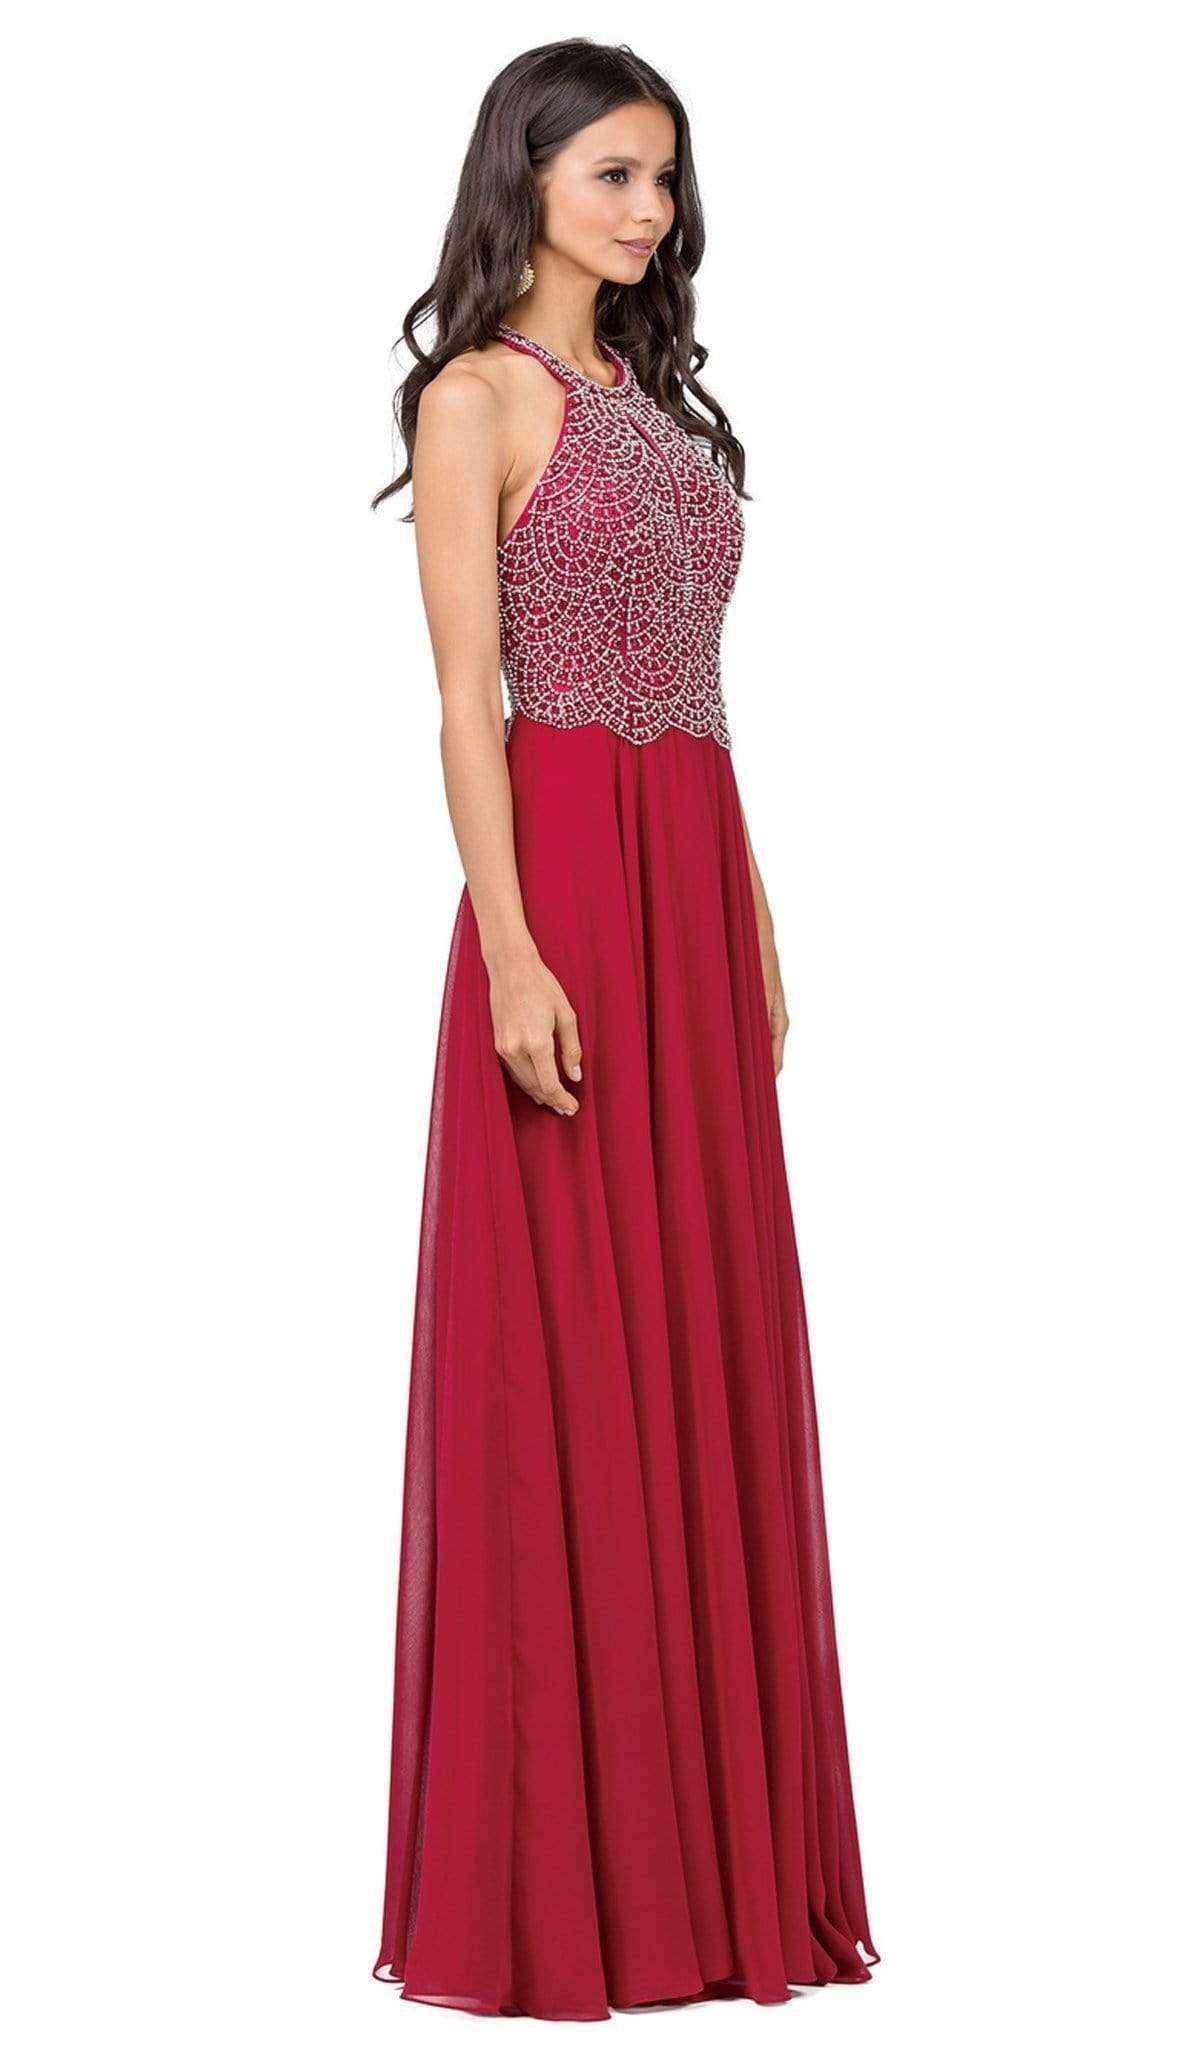 Dancing Queen, Dancing Queen - Bead Embellished Halter Evening Dress 2402 - 1 pc Blush In Size M Available